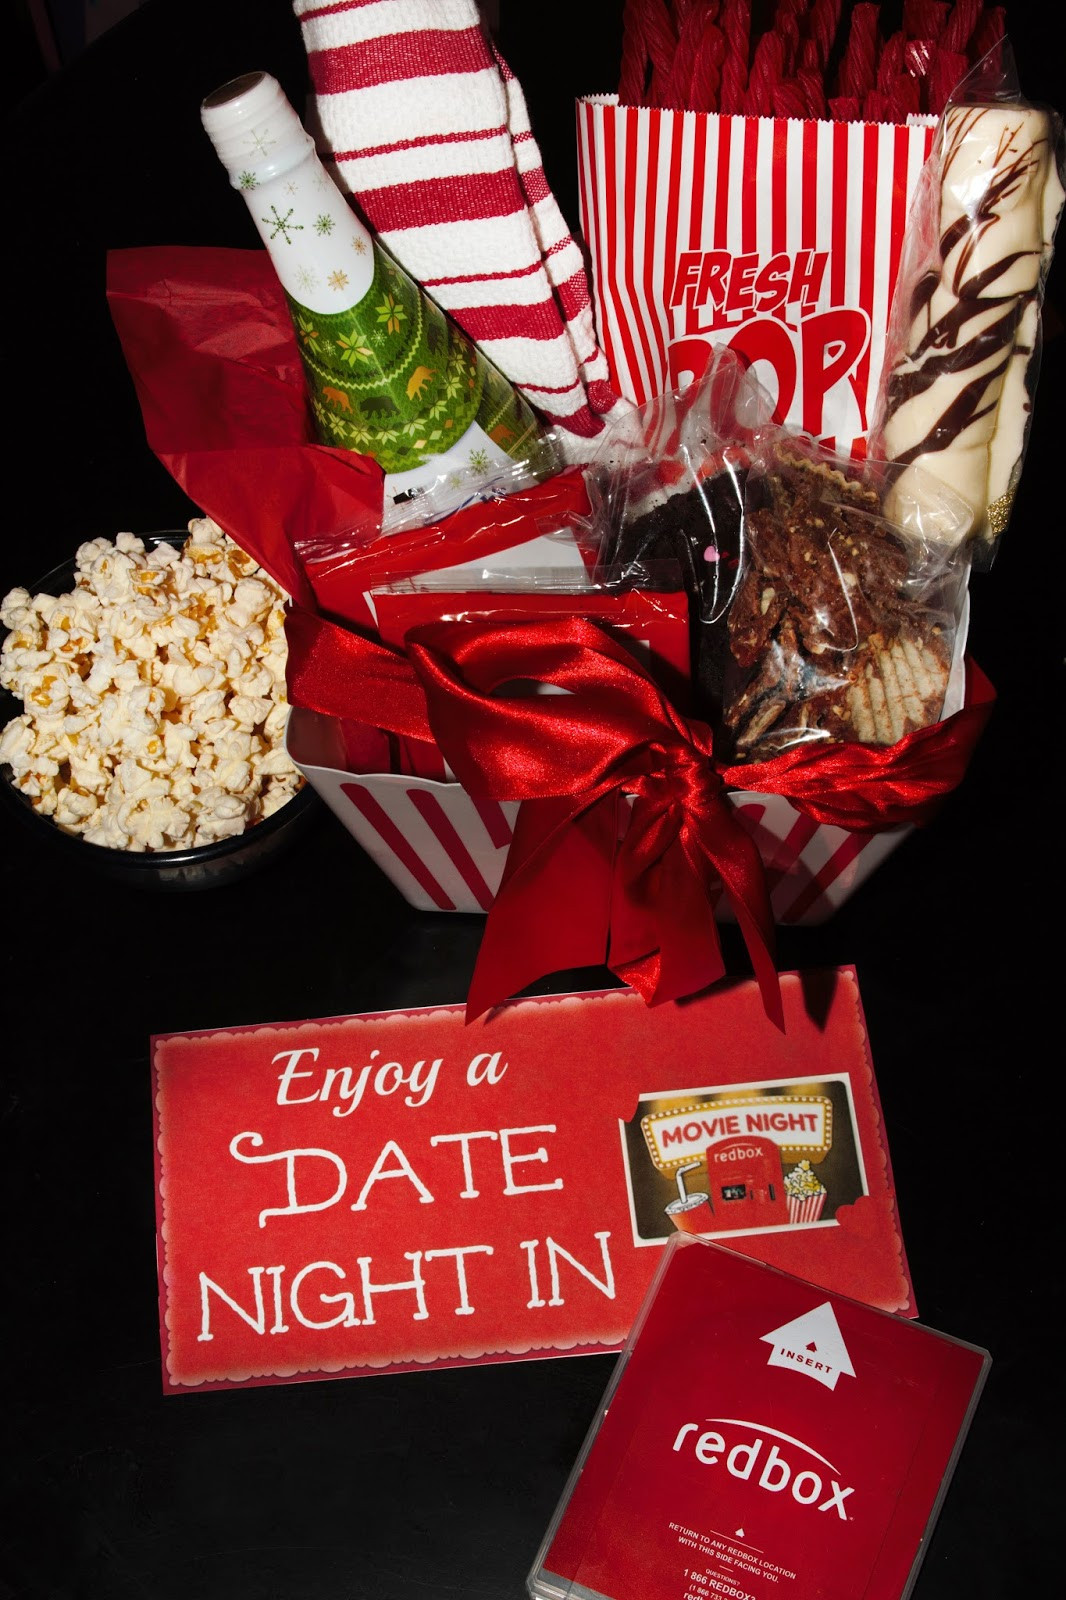 Movie Date Night Gift Basket Ideas
 For the Love of Food DIY Date Night In Gift Basket with